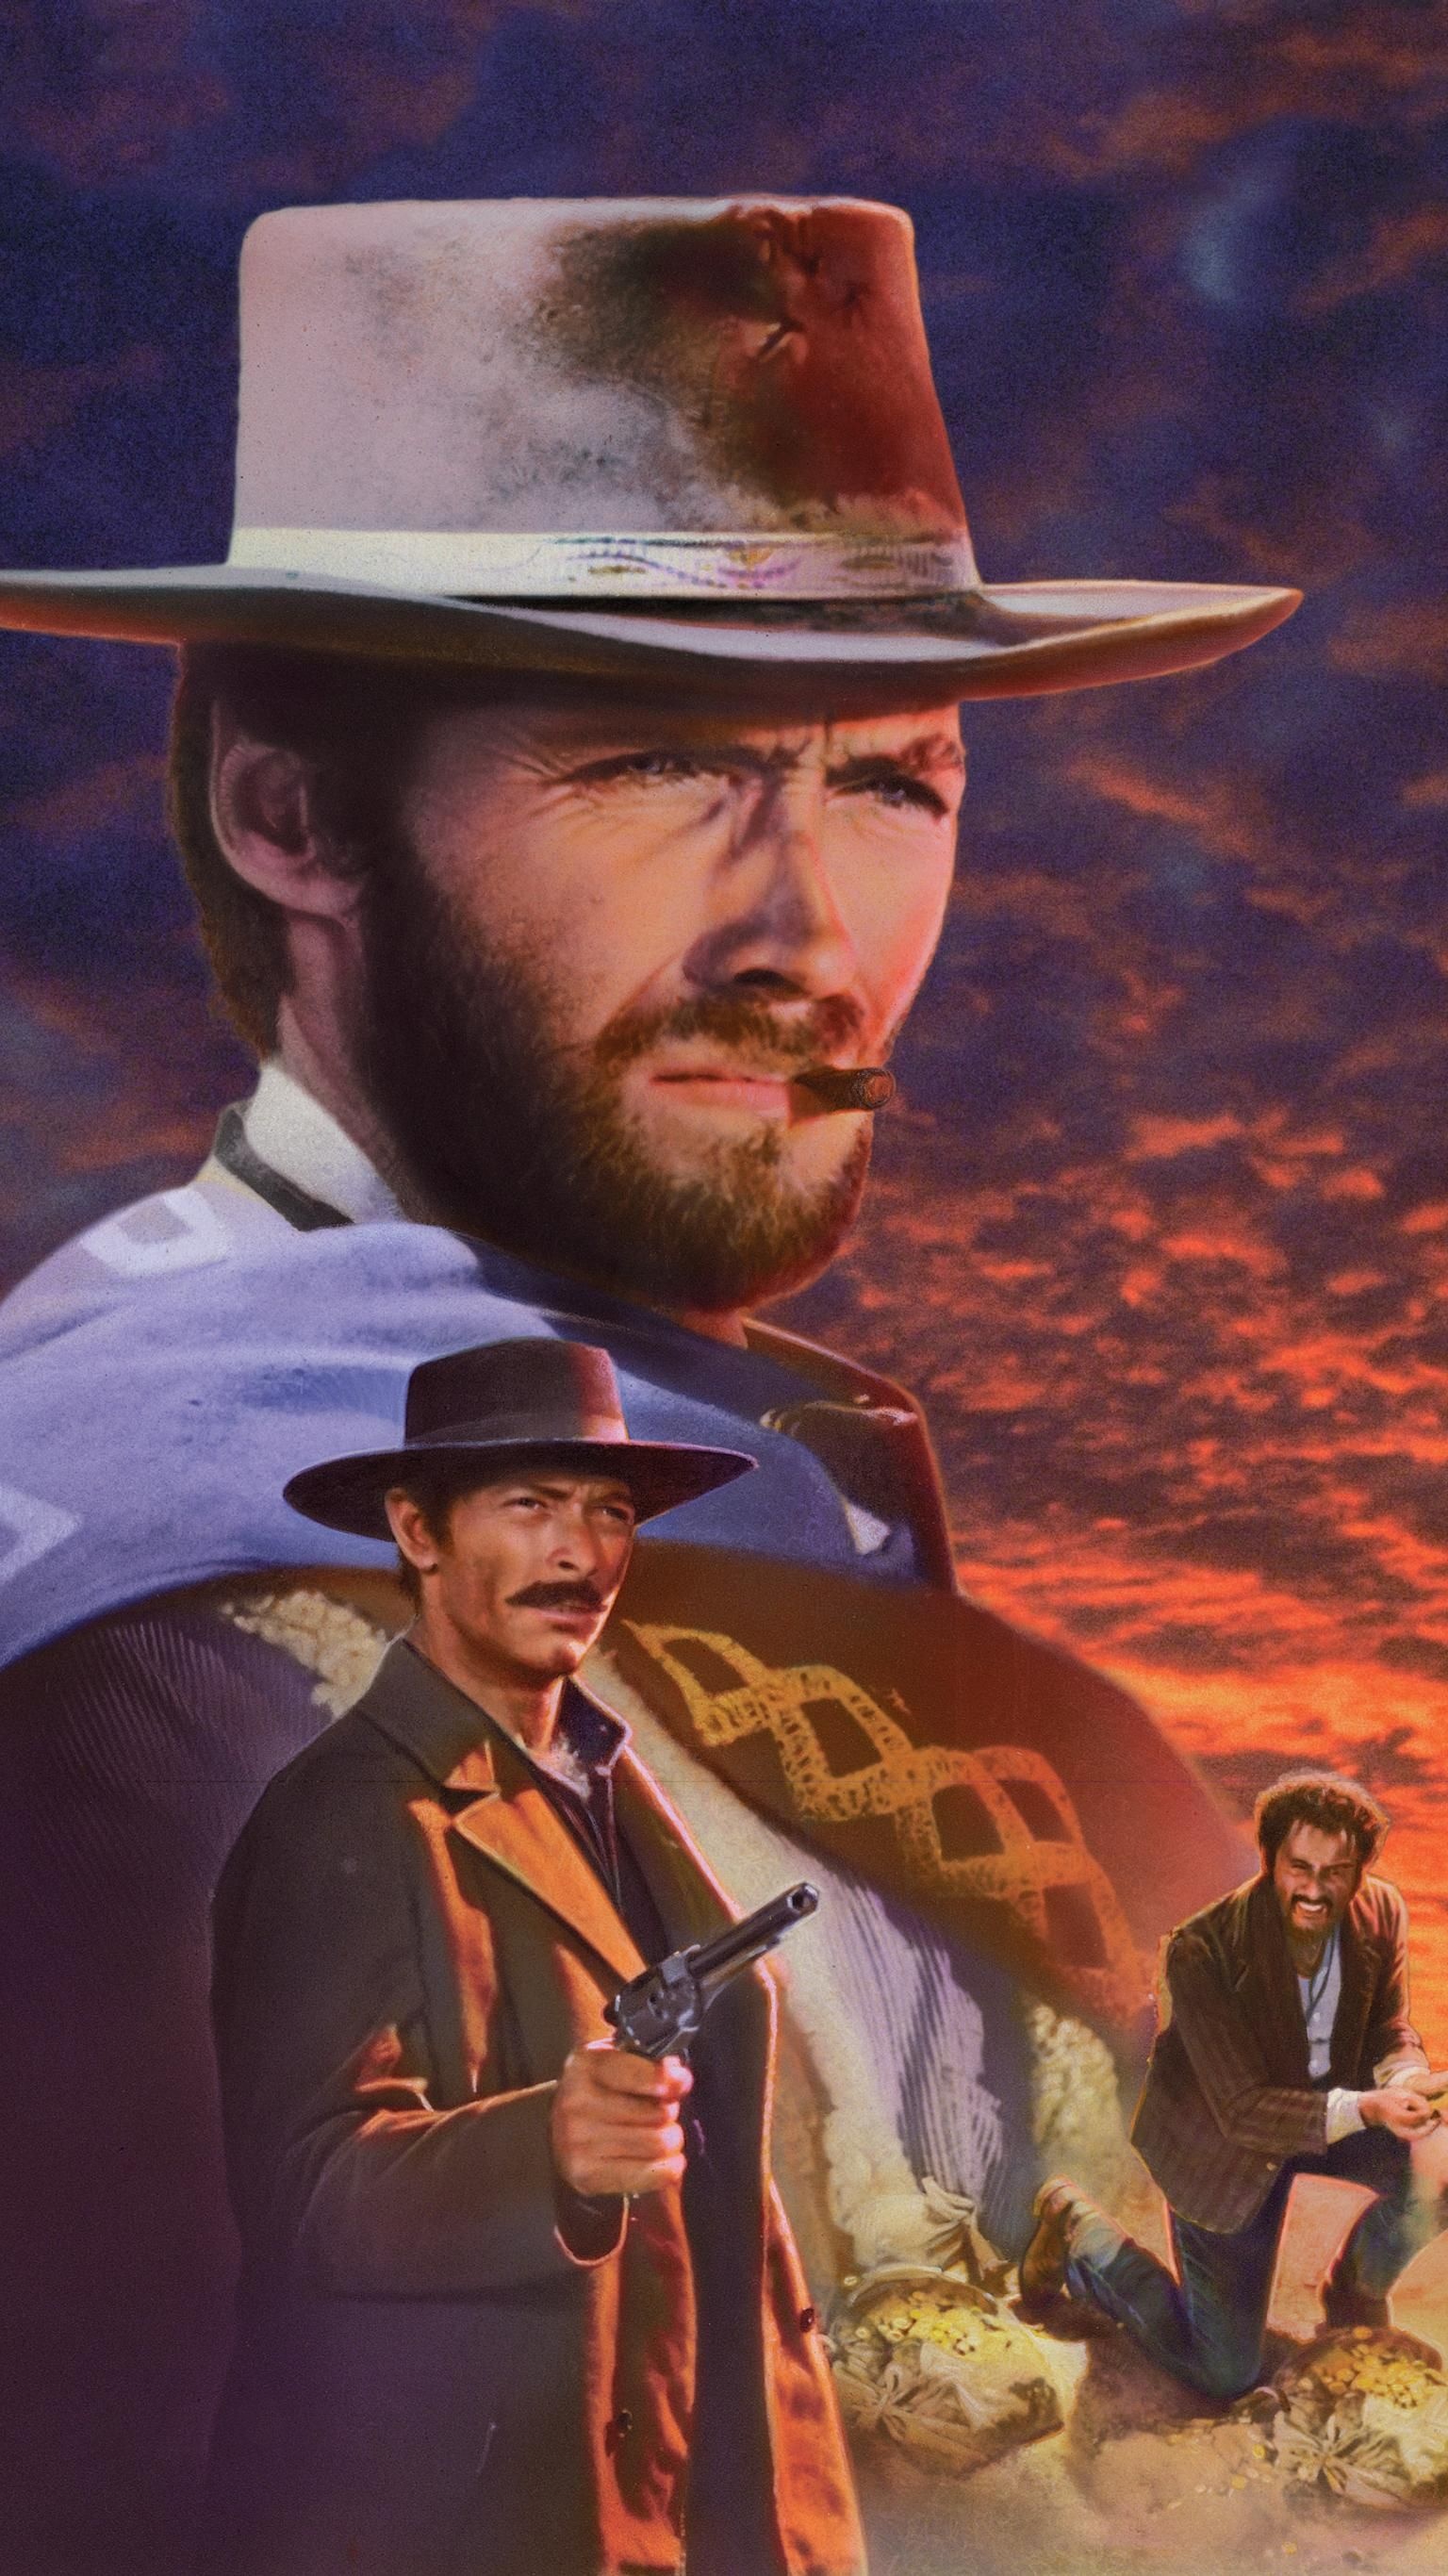 The Good,The Bad and The Ugly - Clint Eastwood Wallpaper (22099213) - Fanpop